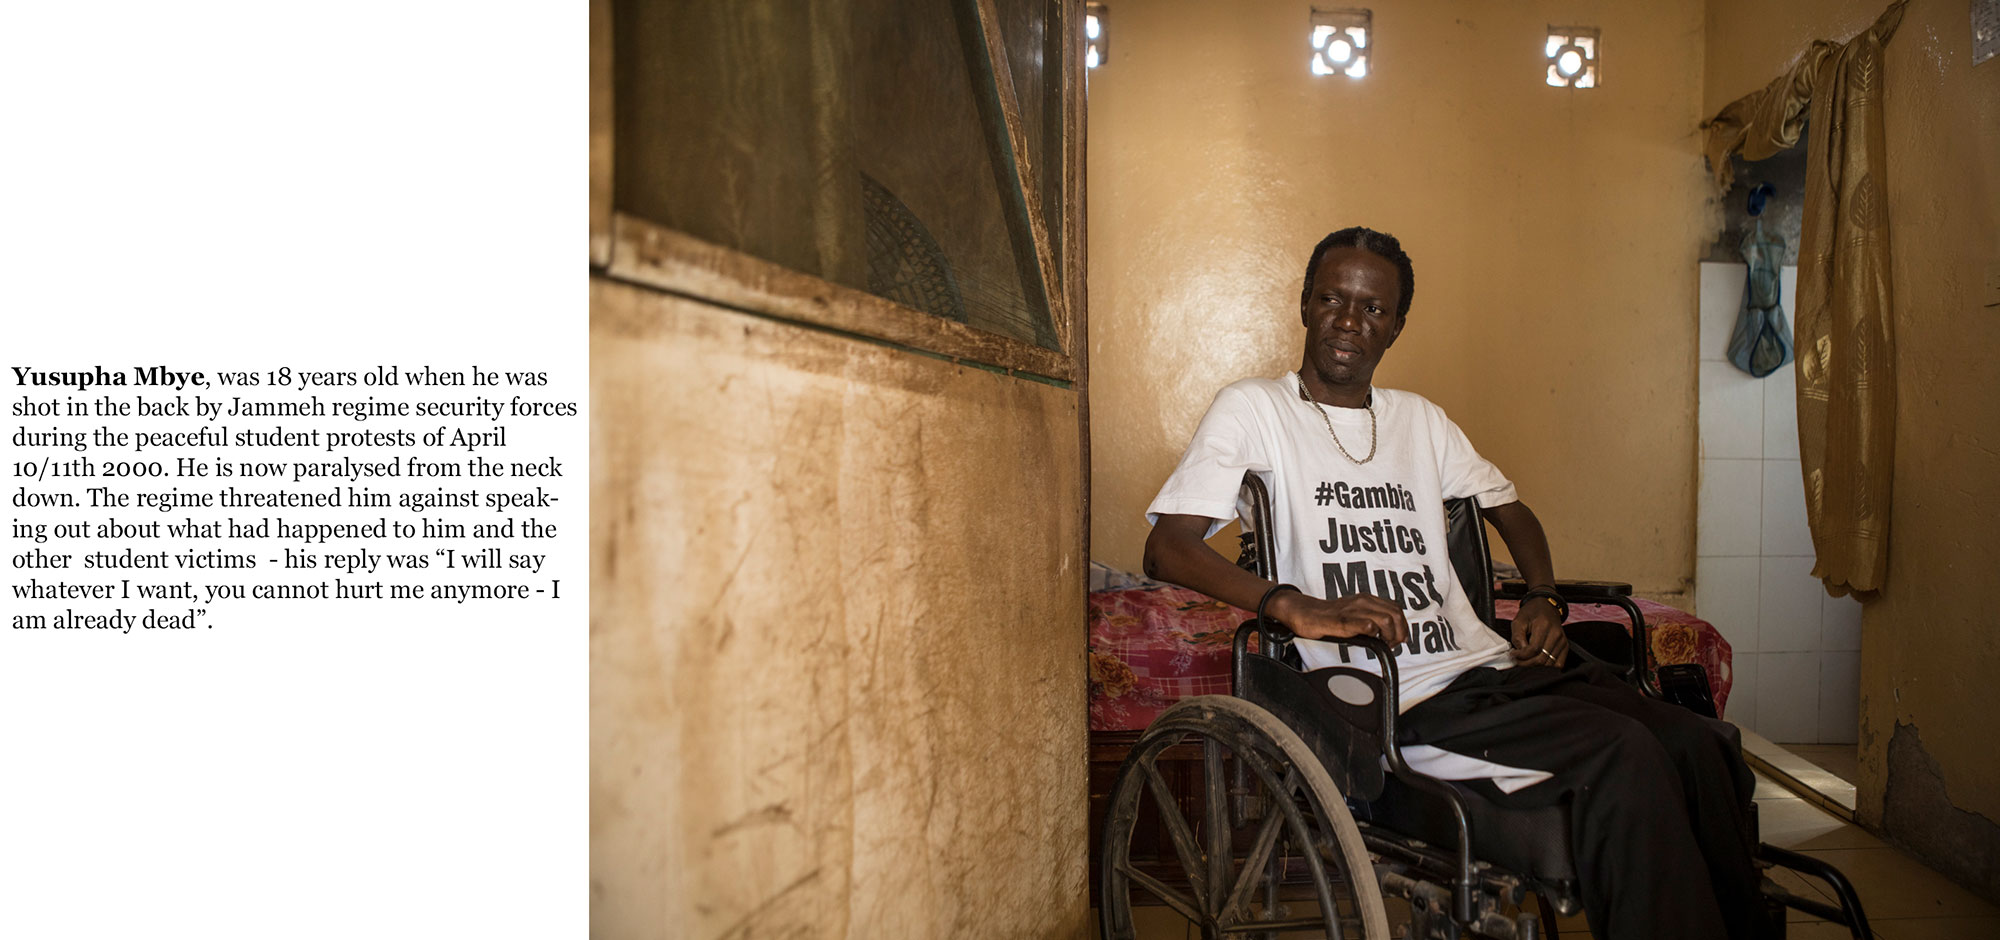 Gambia victims and resisters - Yusupha Mbye shot in the back by Gambian security forces, which left him paralysed, during April 2000 student protests - Jason_florio-0689_TEXT_web